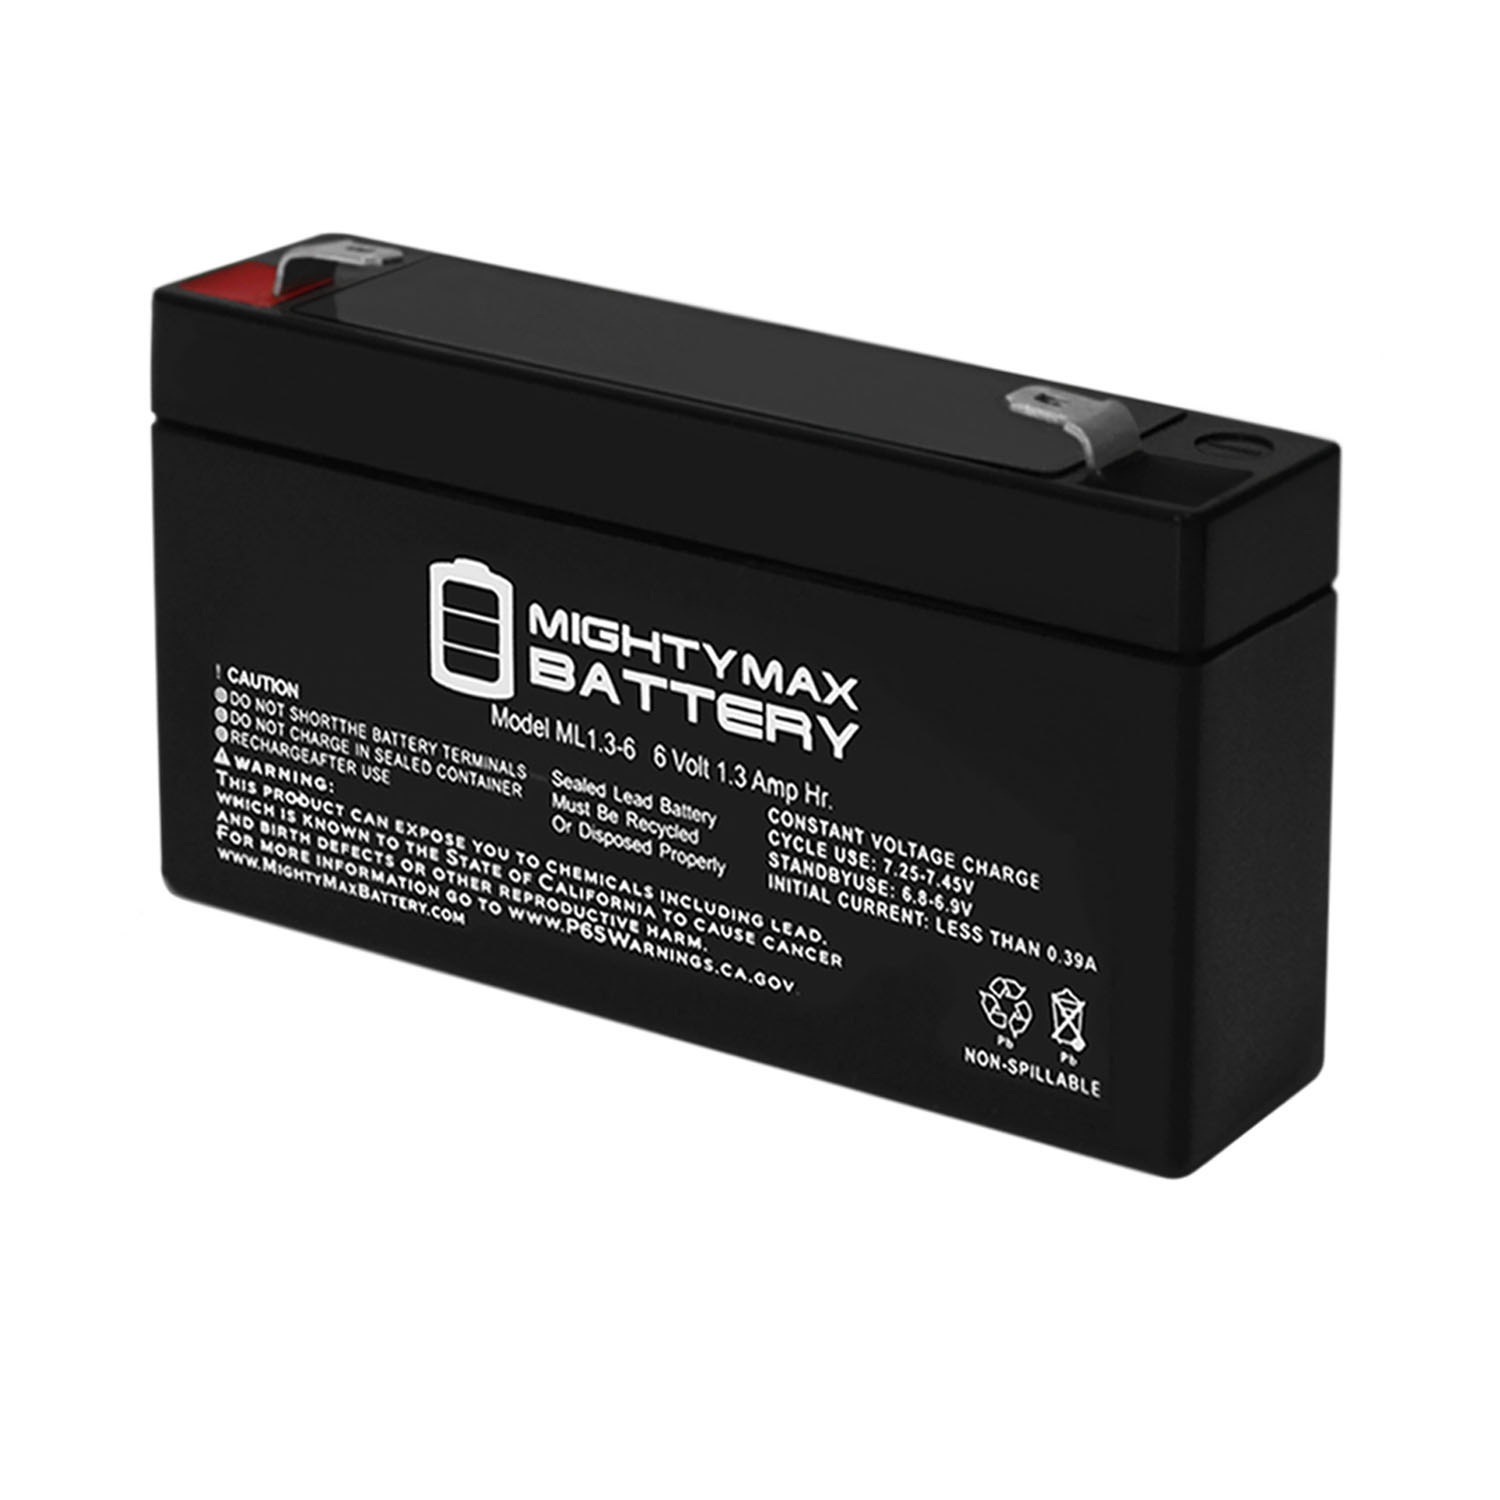 Casil 6V 4Ah Rechargeable Sealed Lead Acid Replacement Battery (1 Pack)